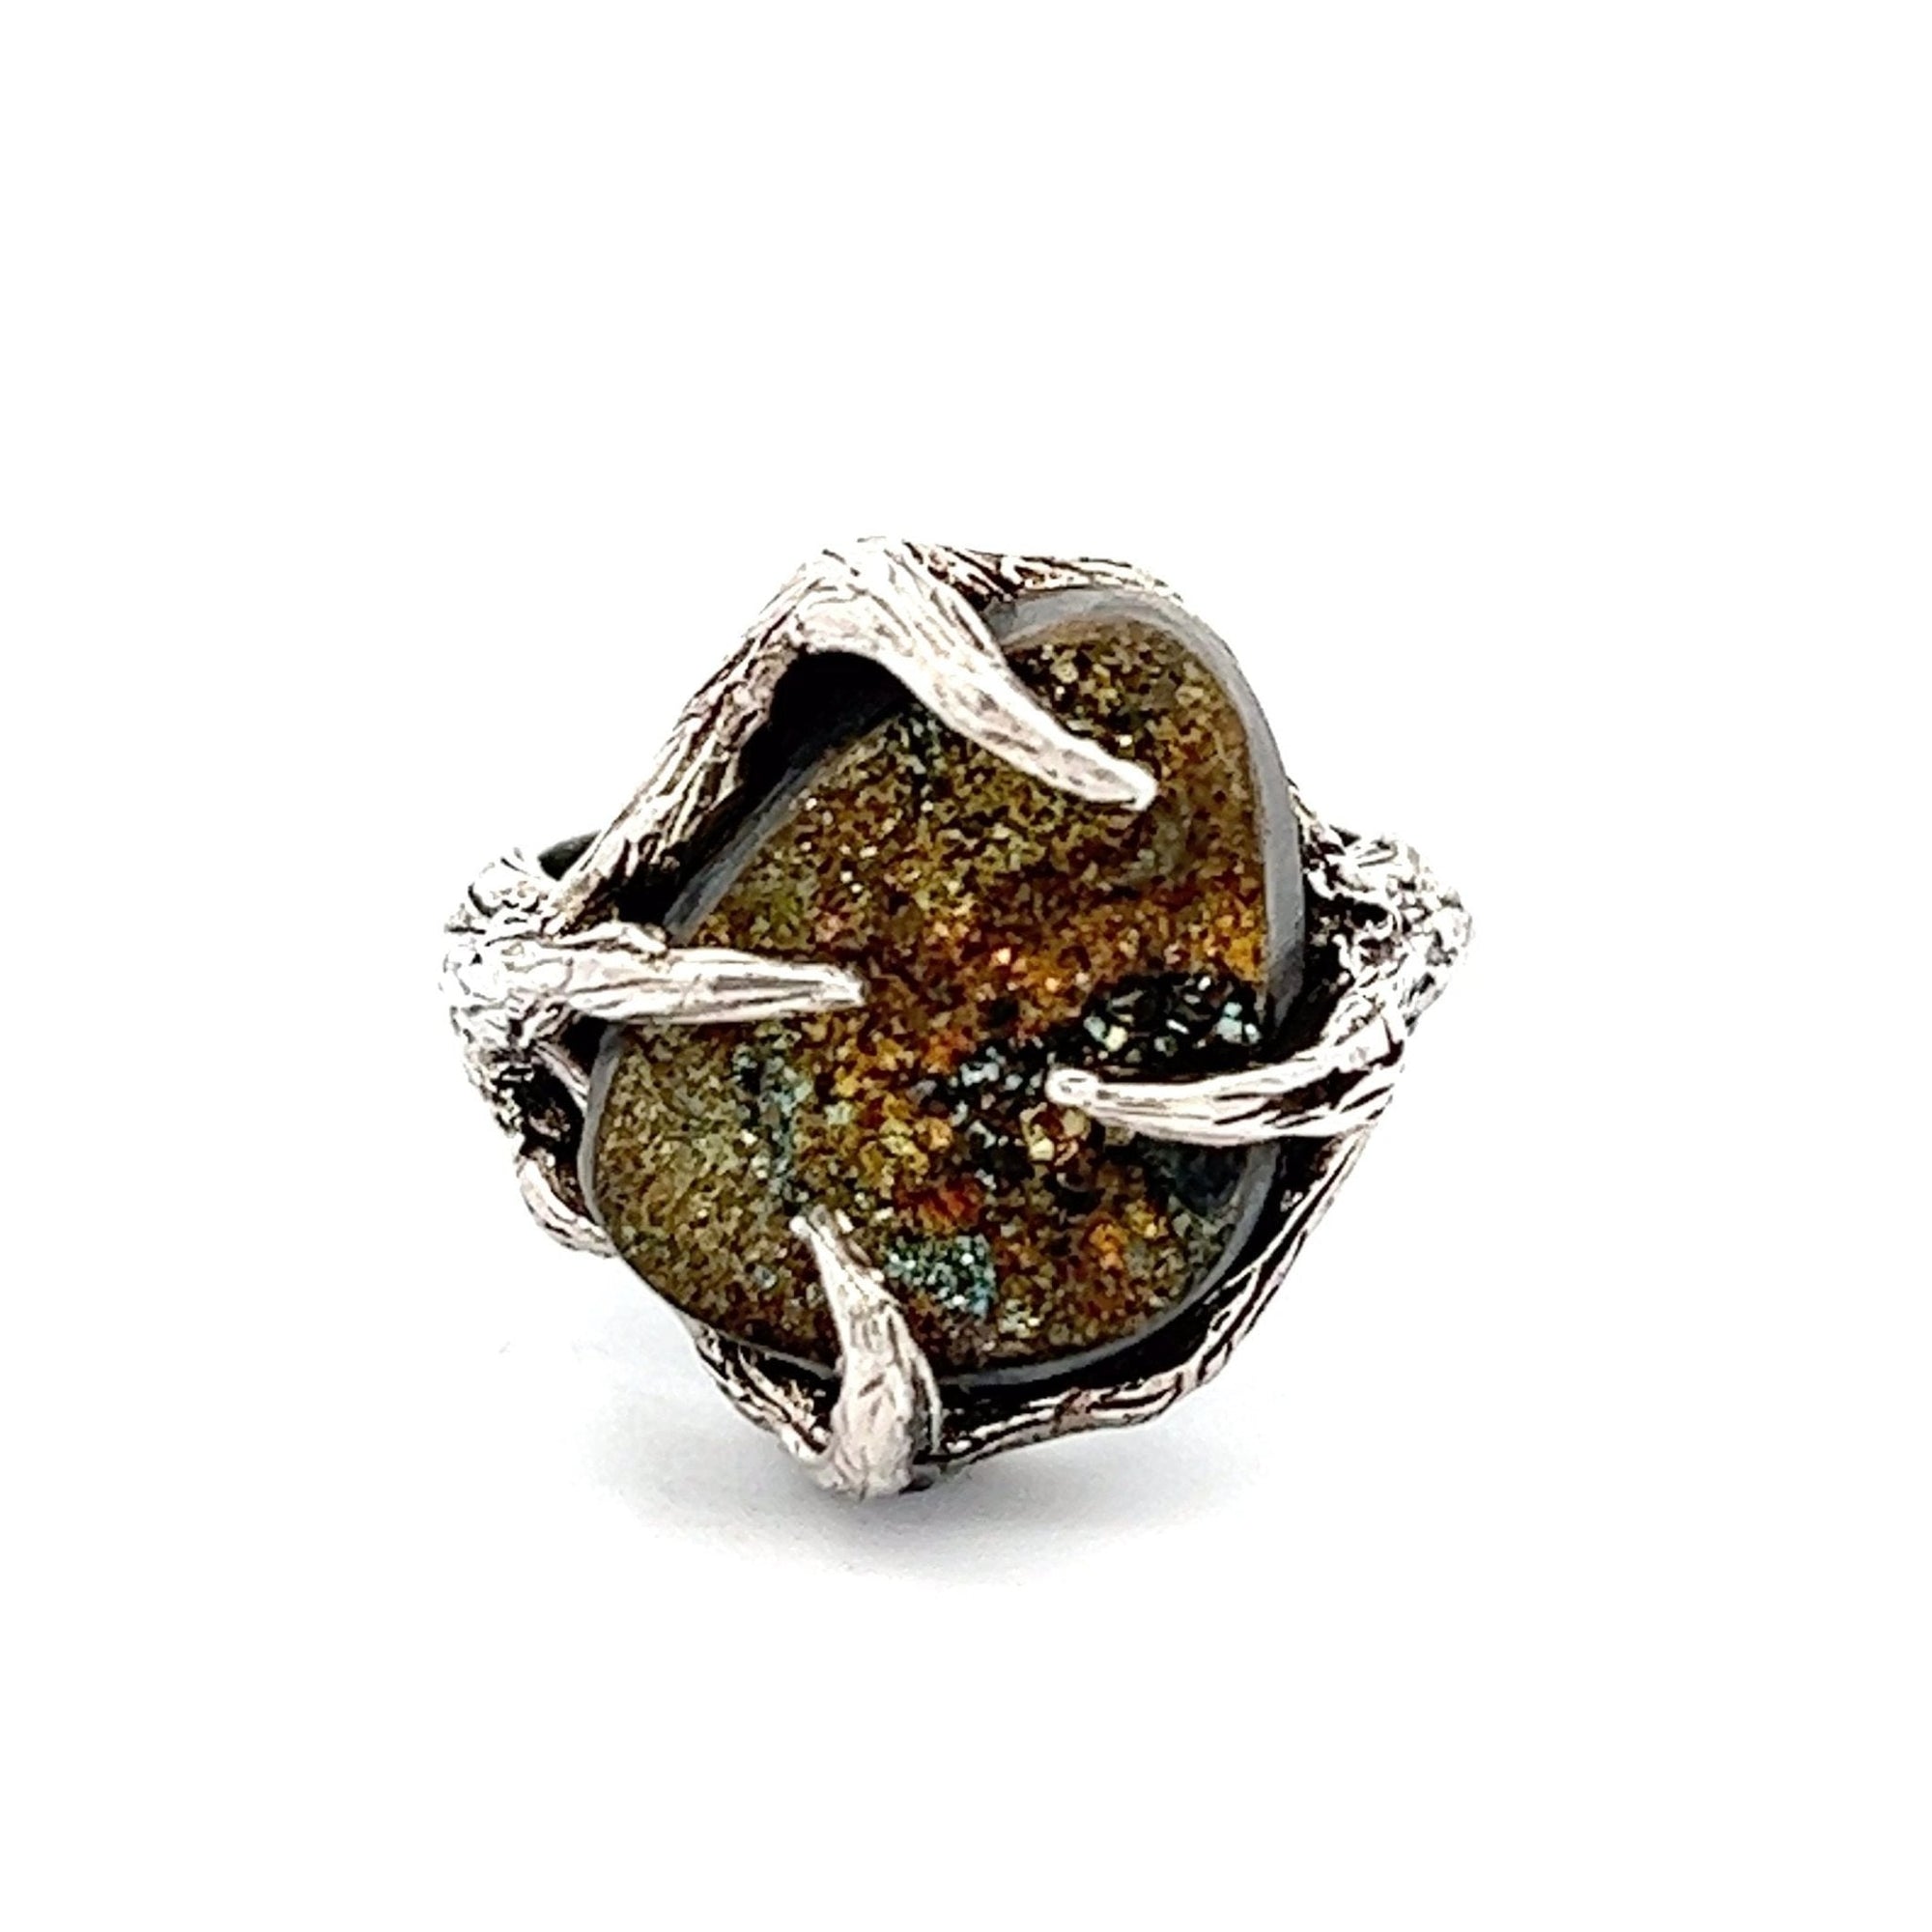 9 CT Pyrite Sterling Silver Tree Branch Ring